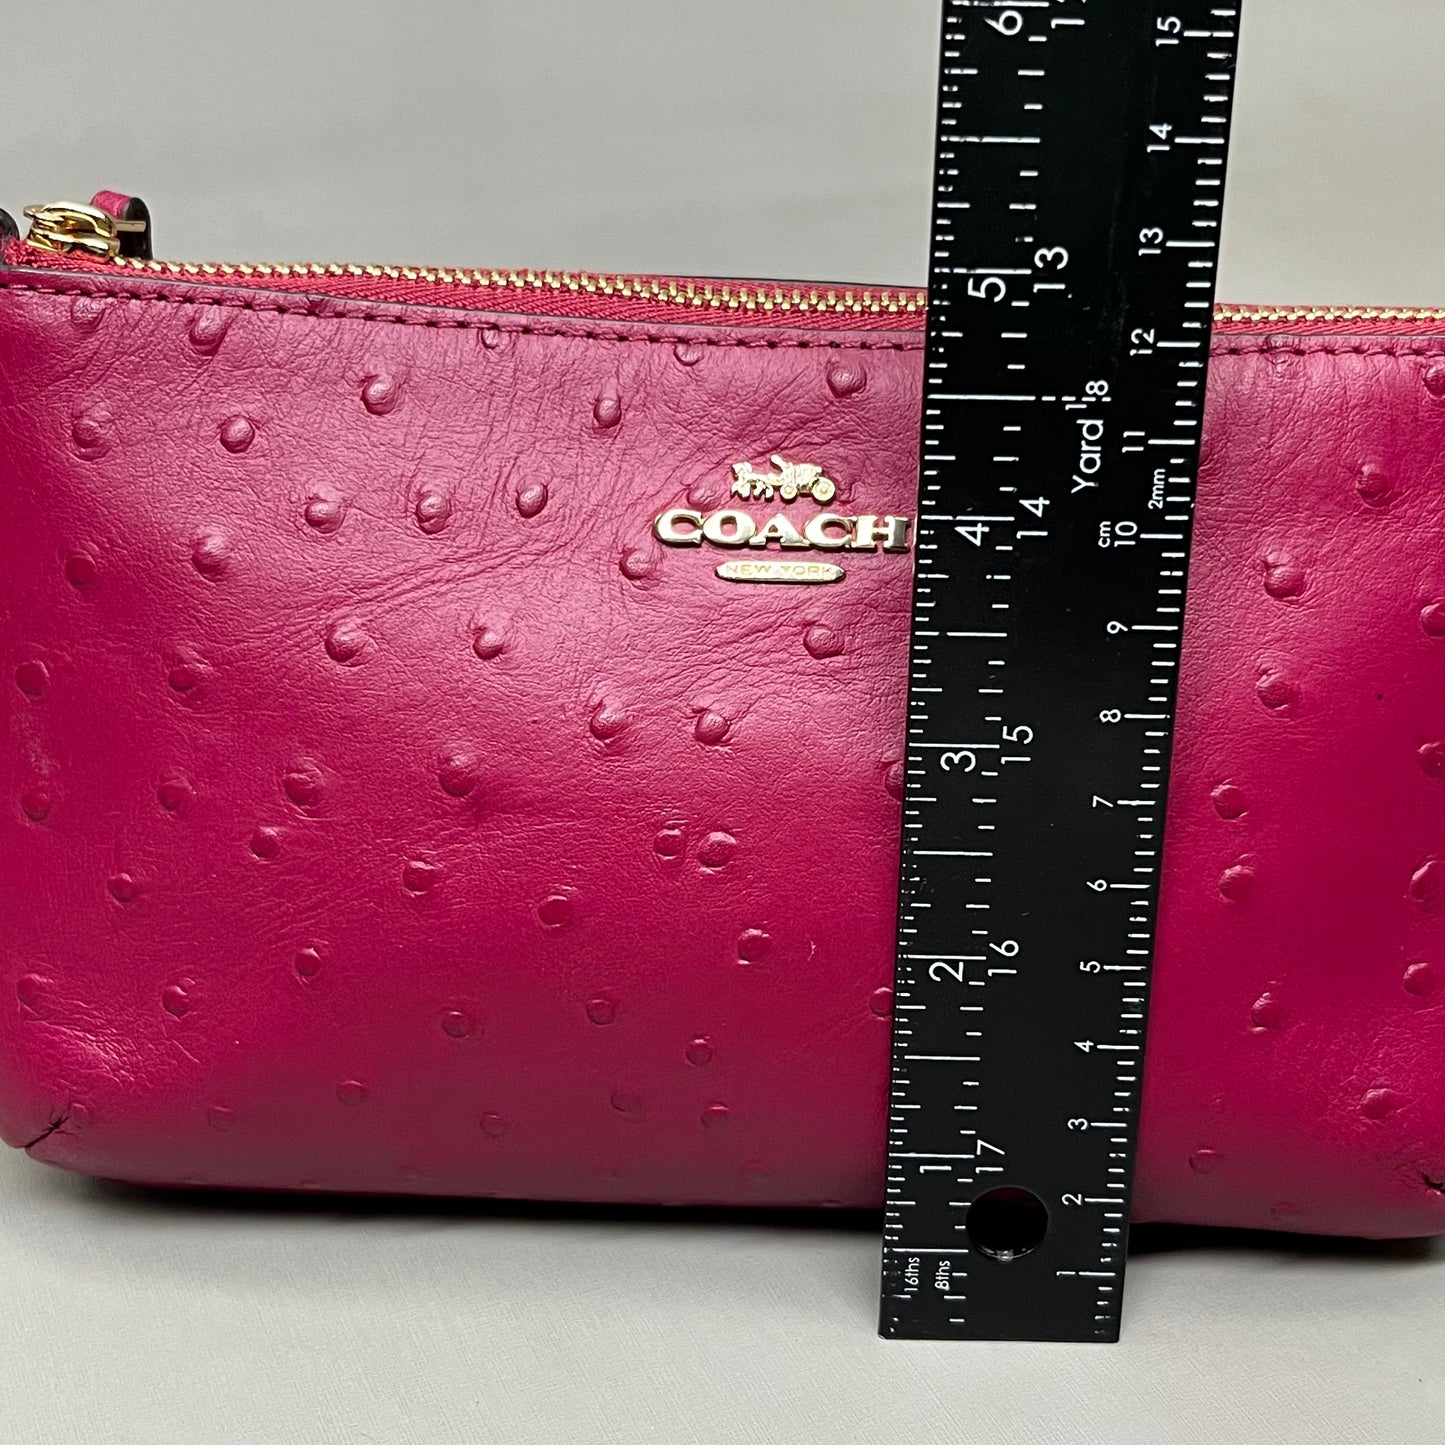 COACH Ostrich Large Leather Wristlet Wallet Phone Case With Chain Pink F79891 (New)